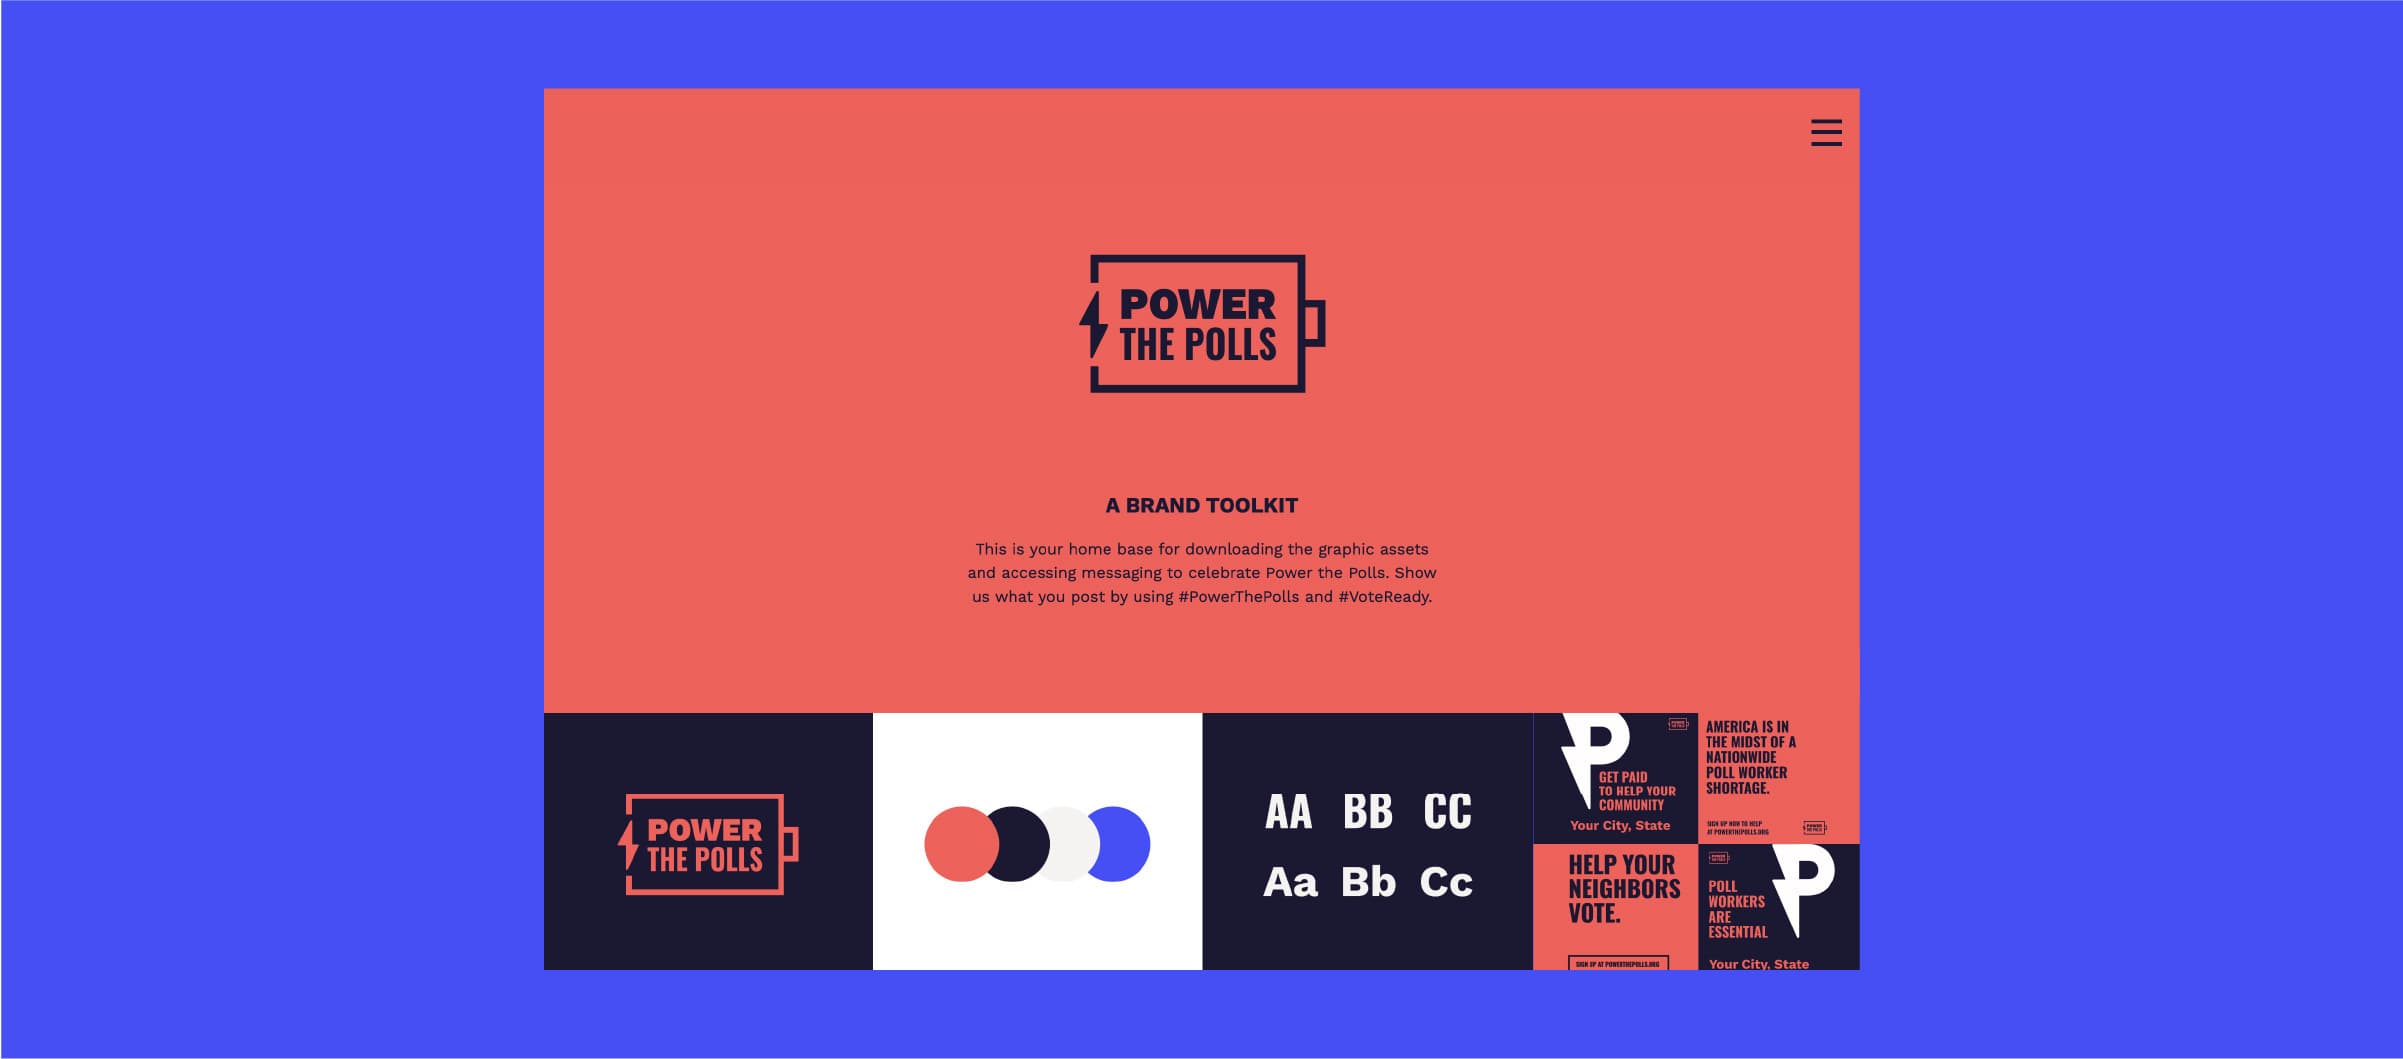 Screenshot of the "Power the Polls" website homepage, featuring a bold red and blue color scheme with the logo and brand toolkit. Elements include various images and text samples of the brand, such as color palettes, typefaces, and messages to encourage voting.